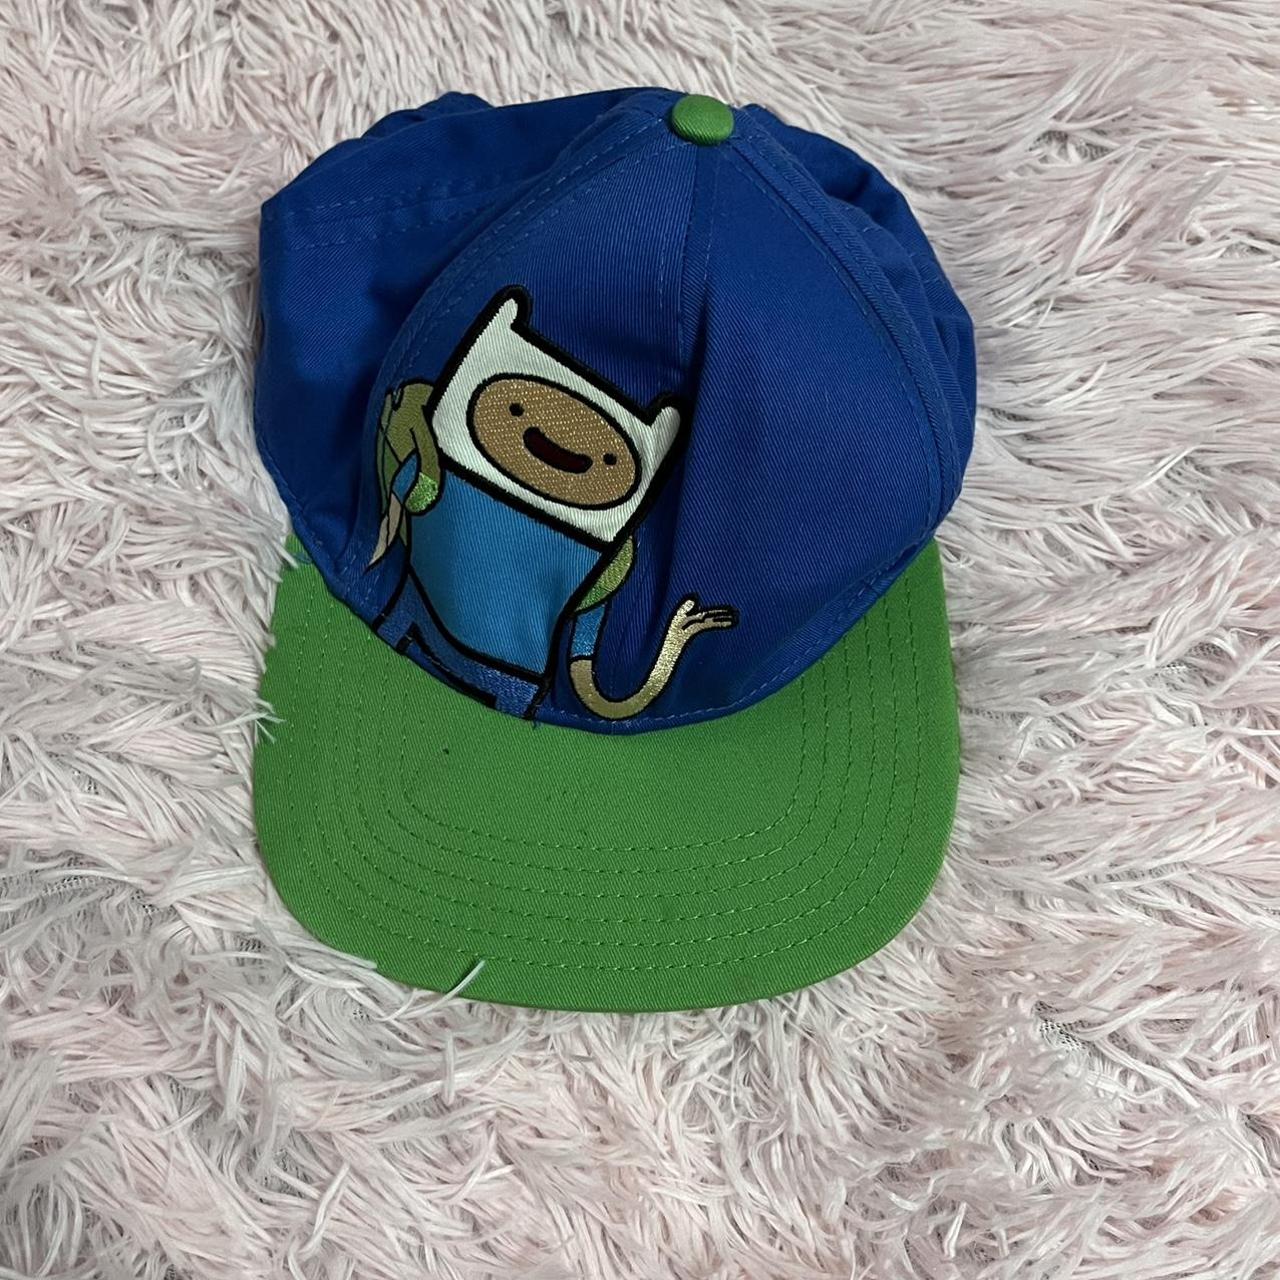 Product Image 1 - Adventure time finn hat

#2000s #hottopic